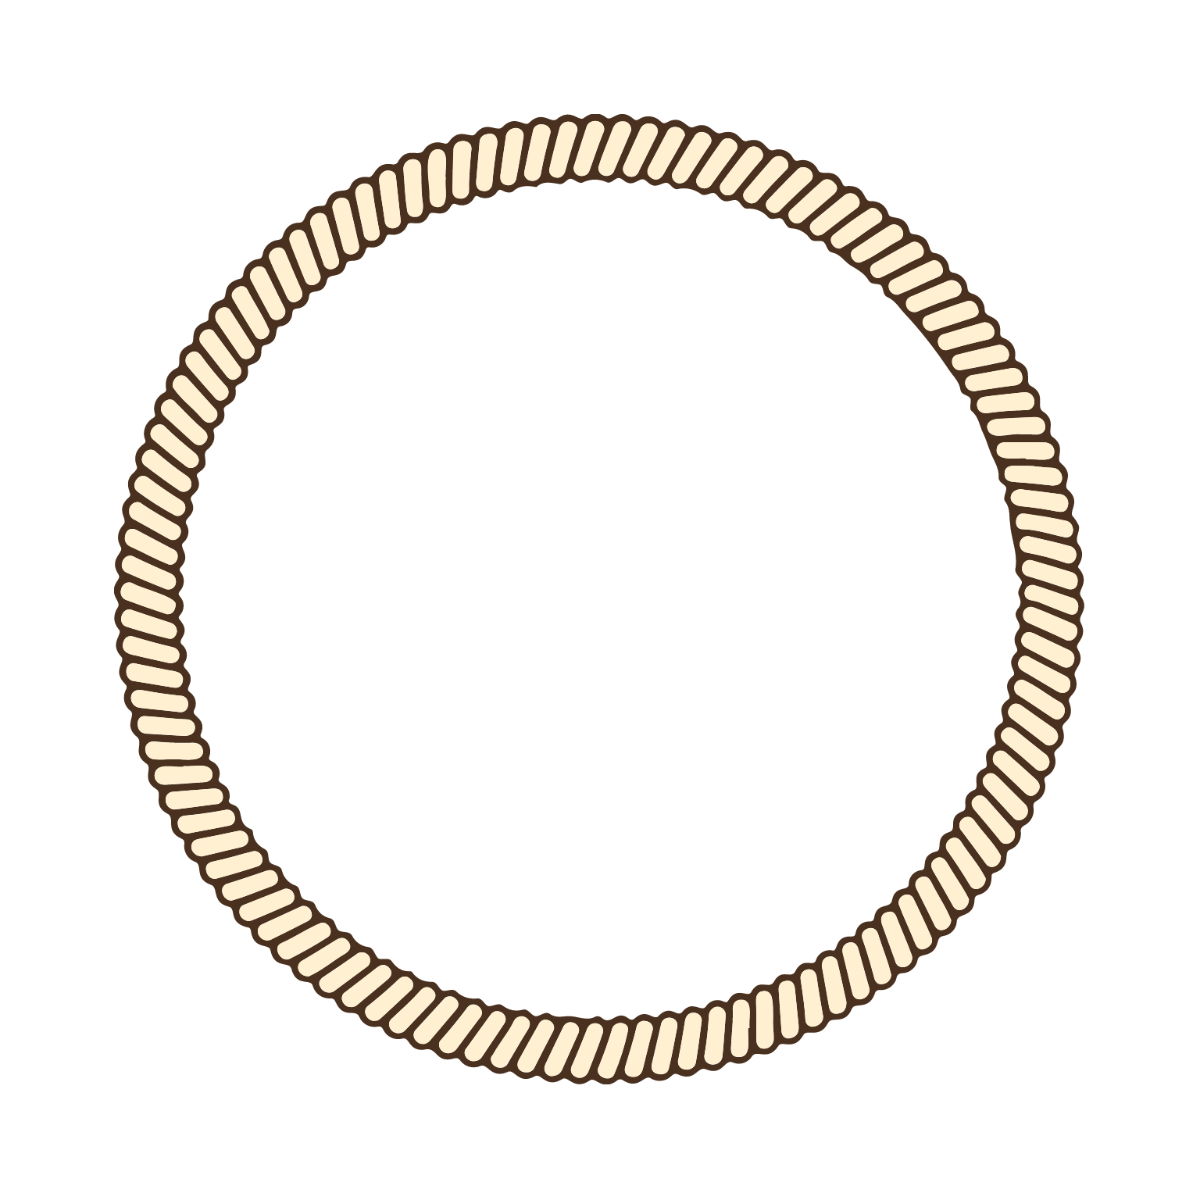 Round Rope clipart